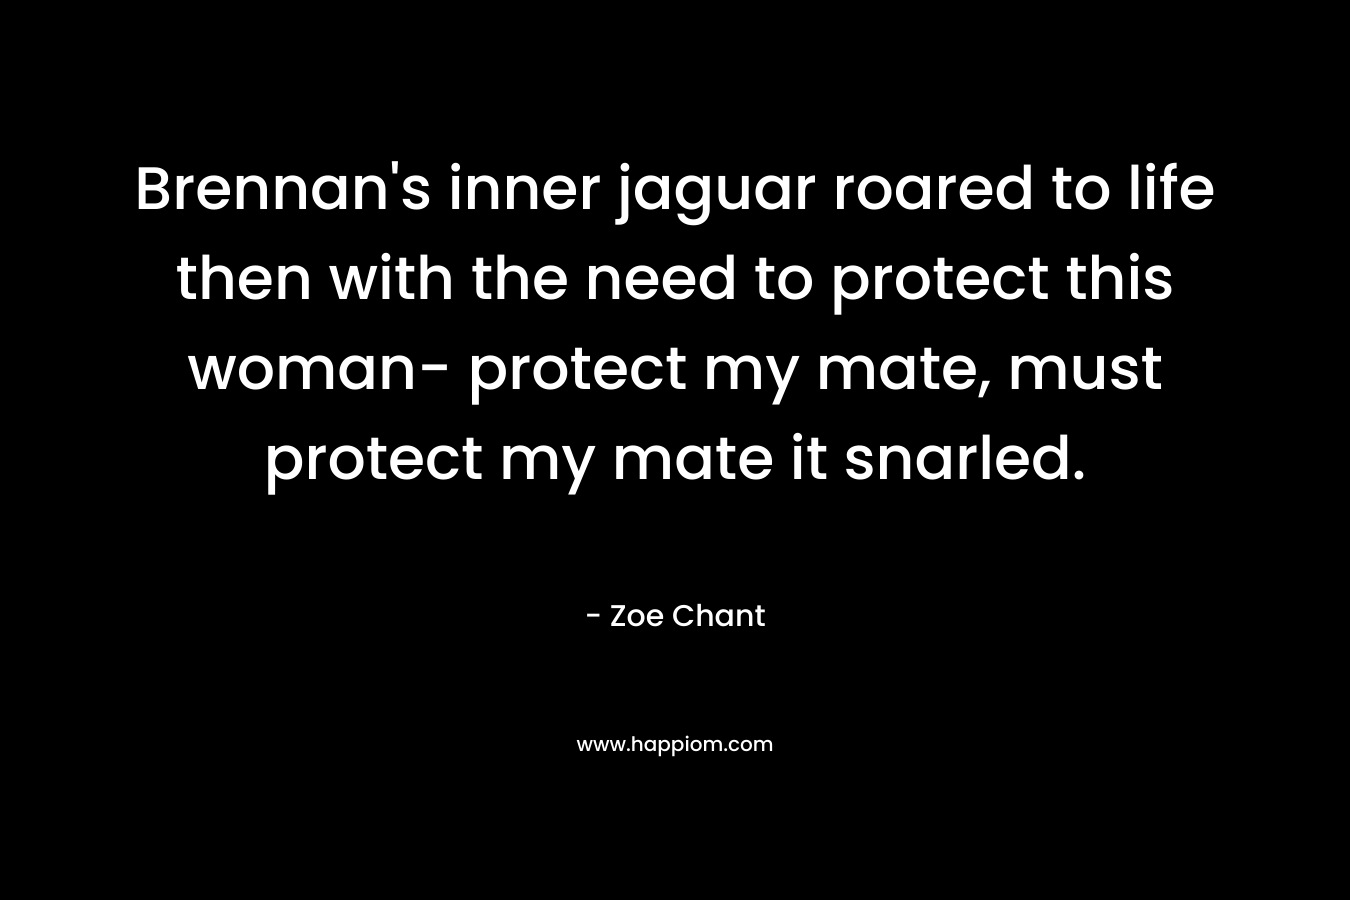 Brennan's inner jaguar roared to life then with the need to protect this woman- protect my mate, must protect my mate it snarled.